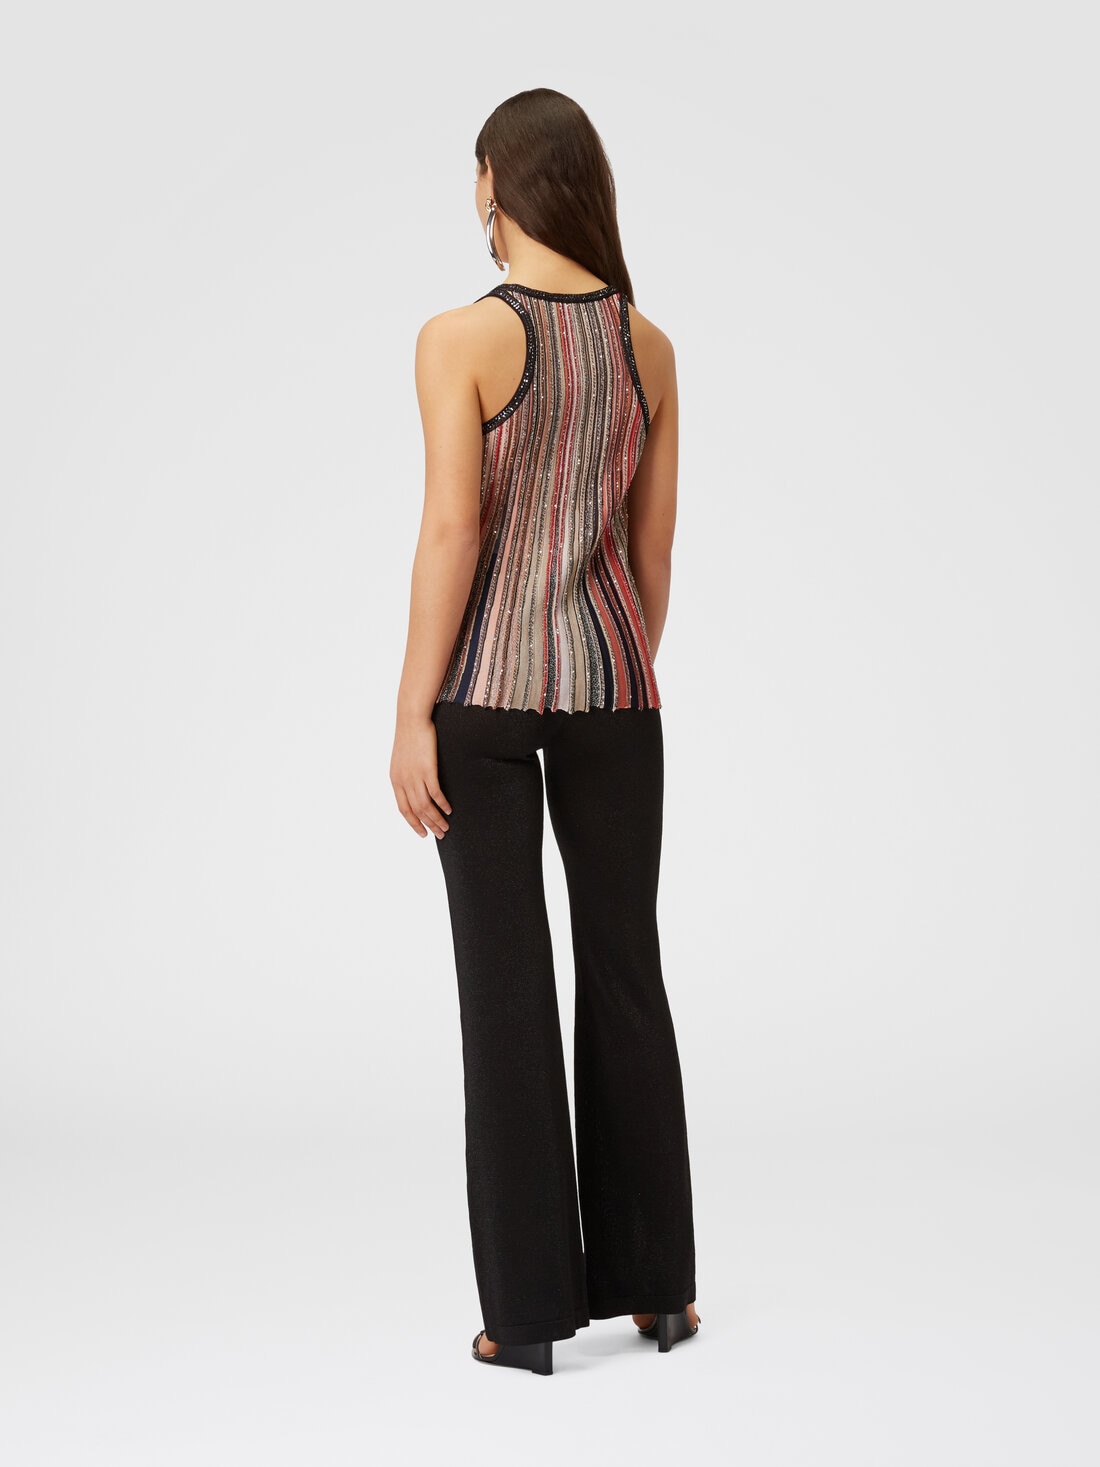 Tank top in vertical striped knit with sequins , Multicoloured  - DS24SK01BK033MSM9AF - 2